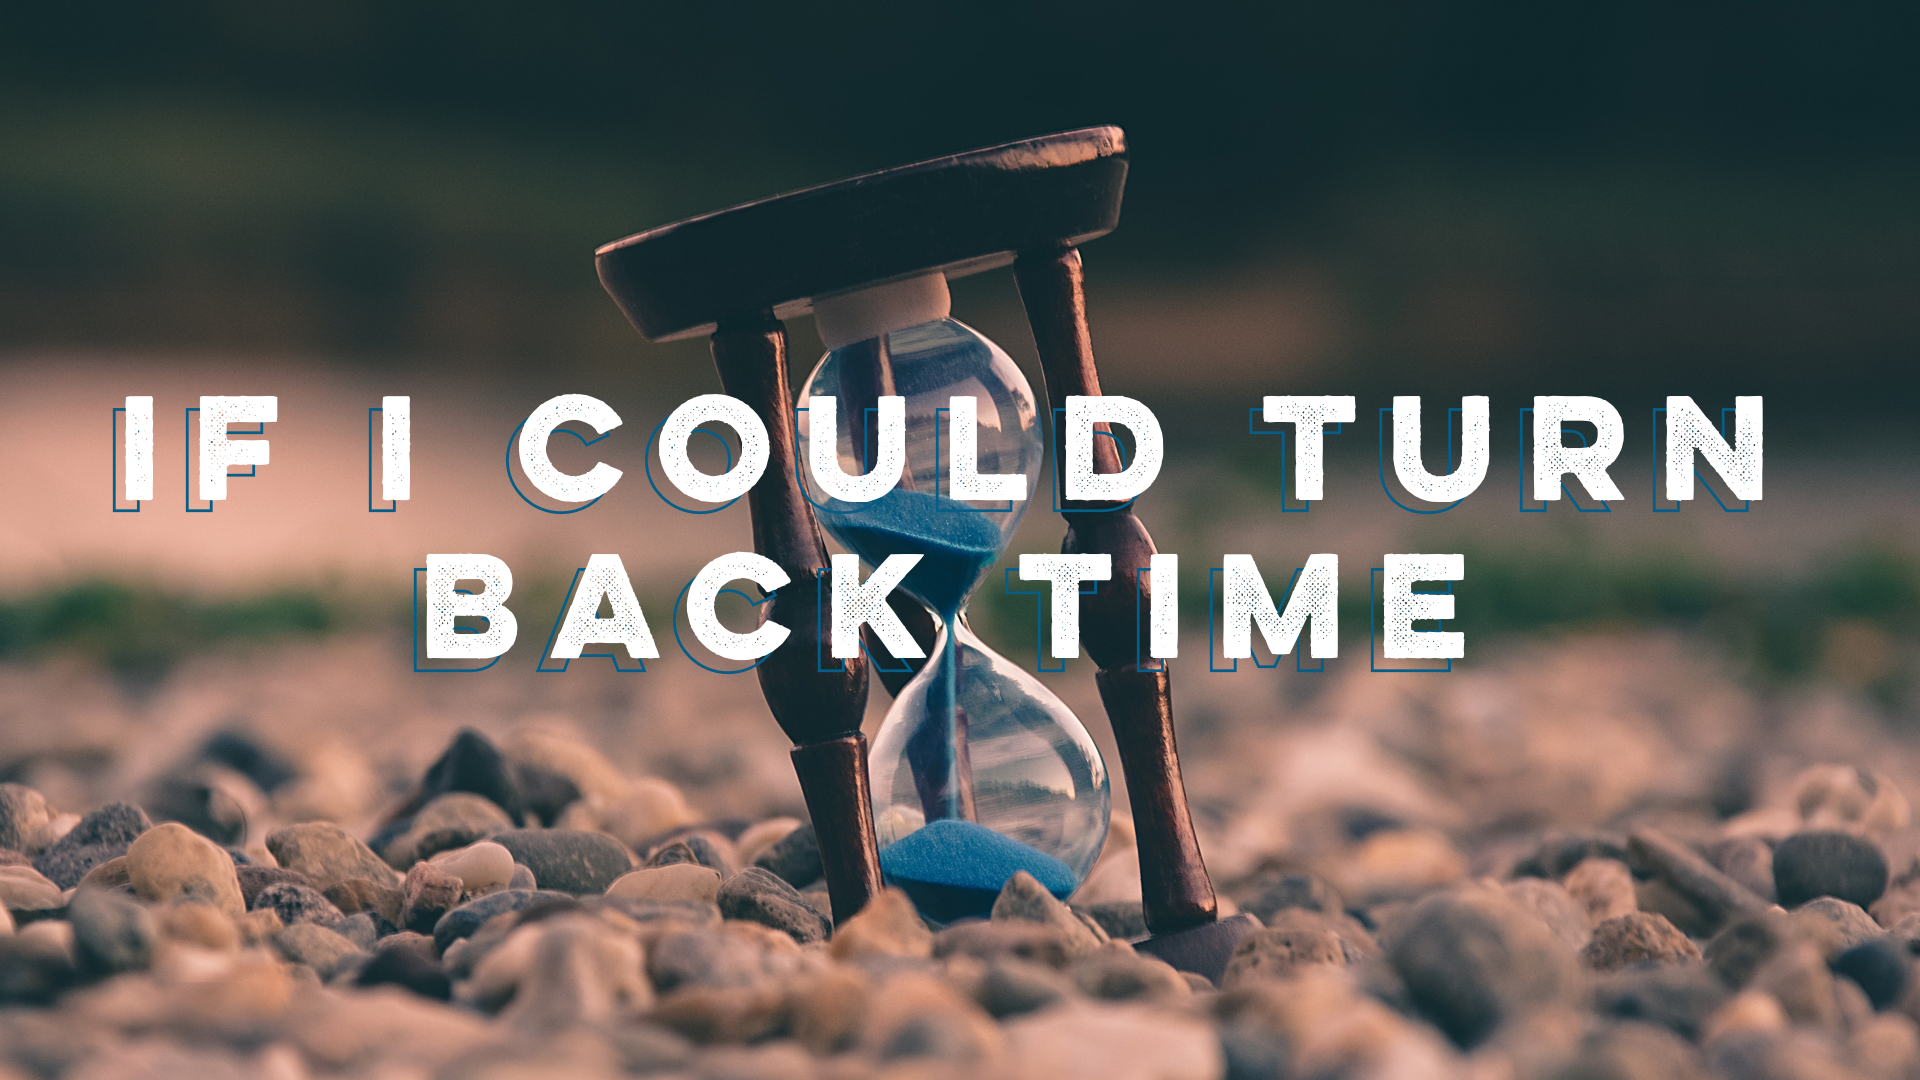 Time will turning time. If i could turn back time. Turn back time. Could turn back. Шер if i could turn back time.